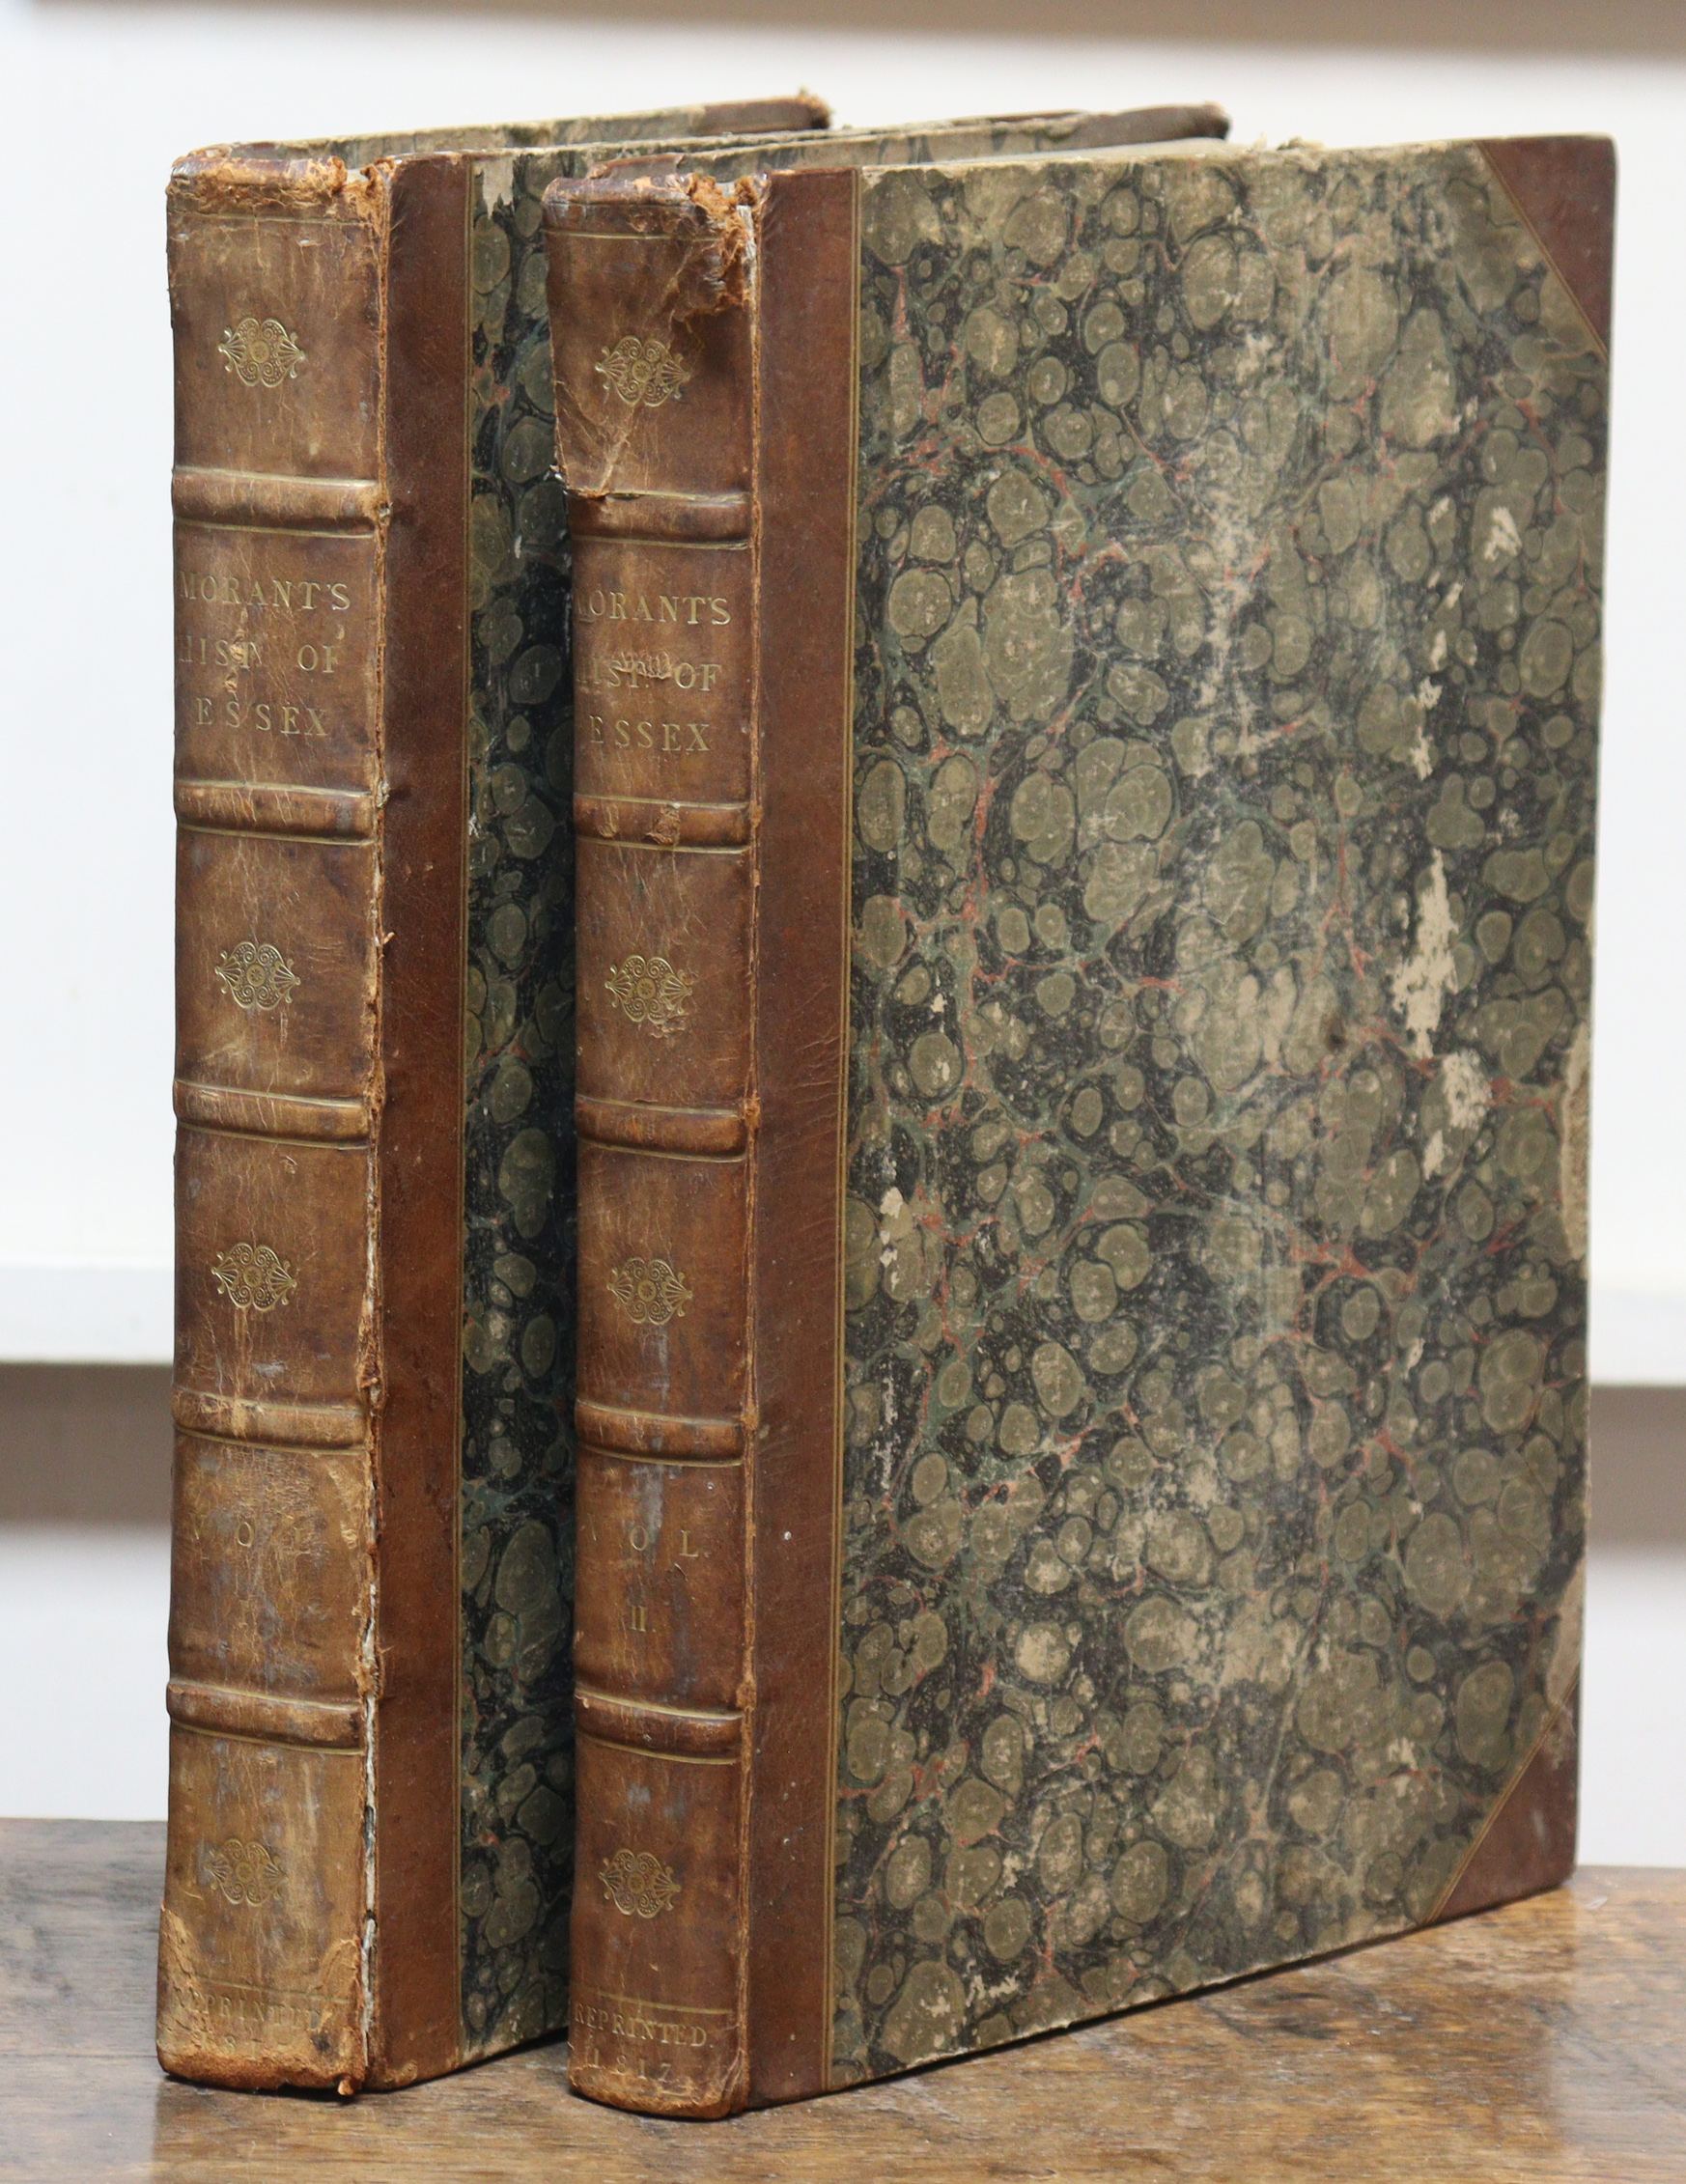 MORANT, Philip, “The History and Antiquities of the Country of Essex”, 2 vols, published 1816 by T.